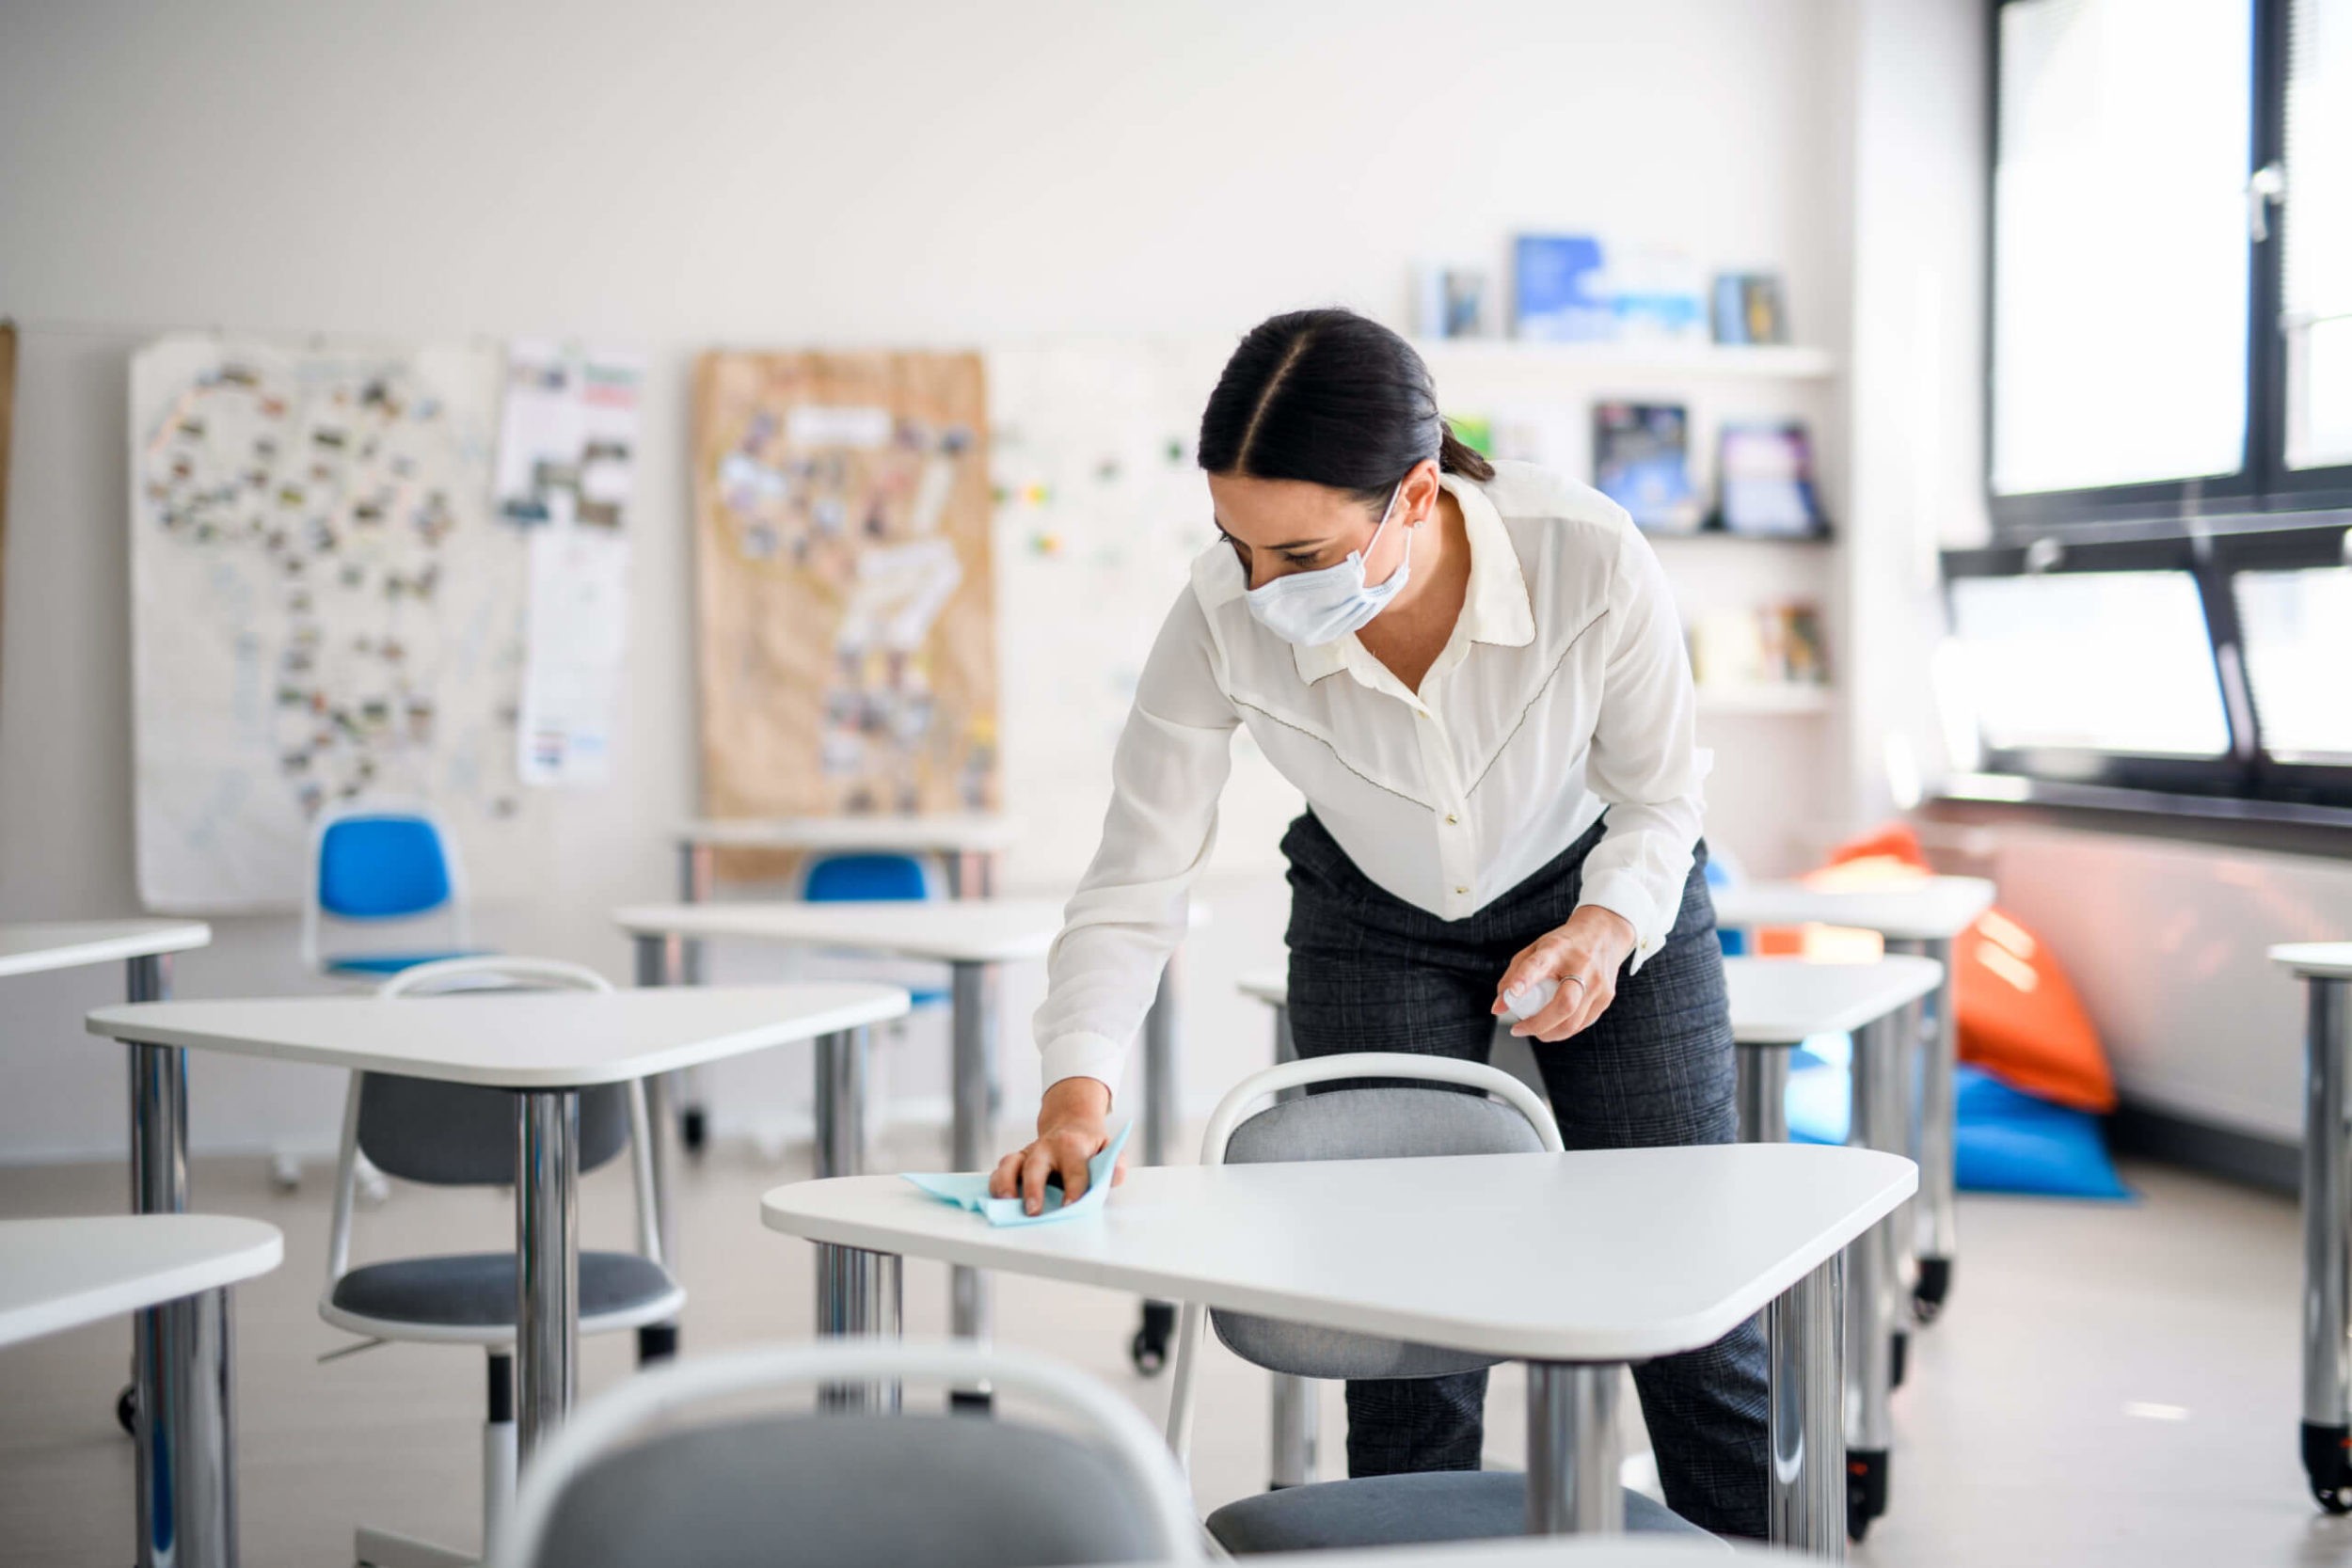 The Most Effective Ways to Clean a Classroom